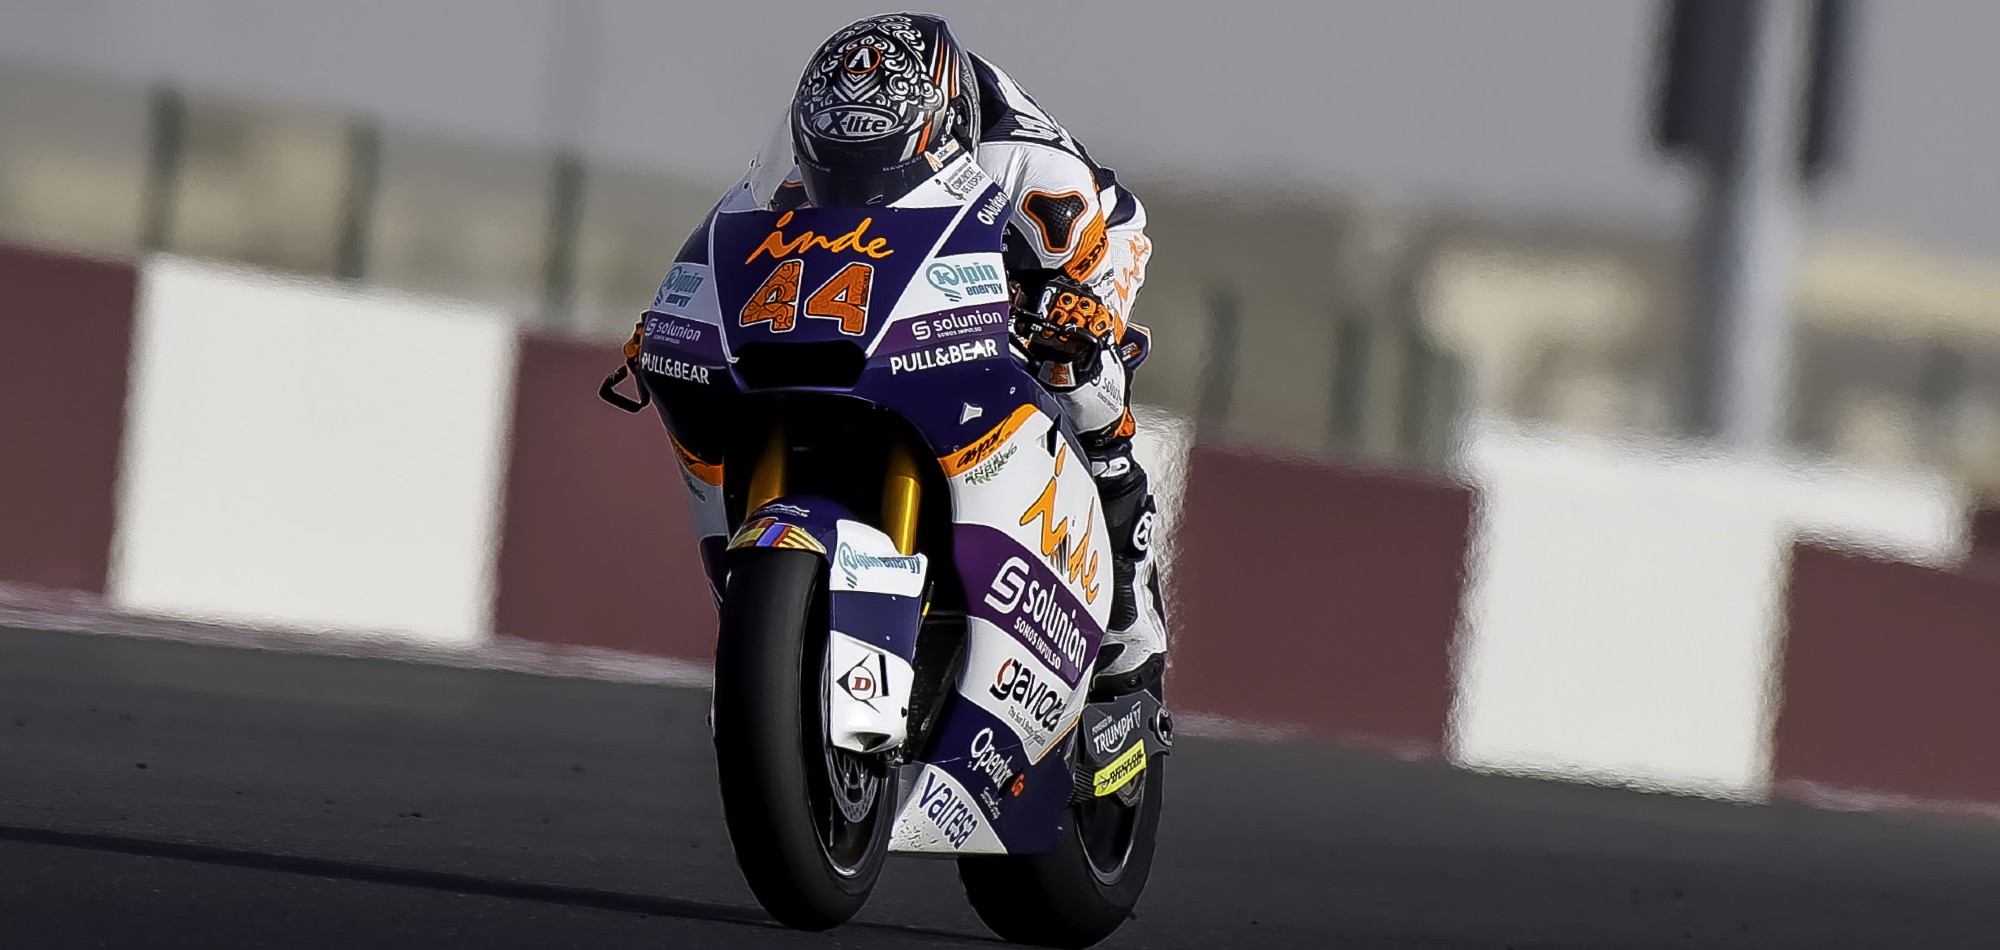 Losail International Circuit gears up for this weekend